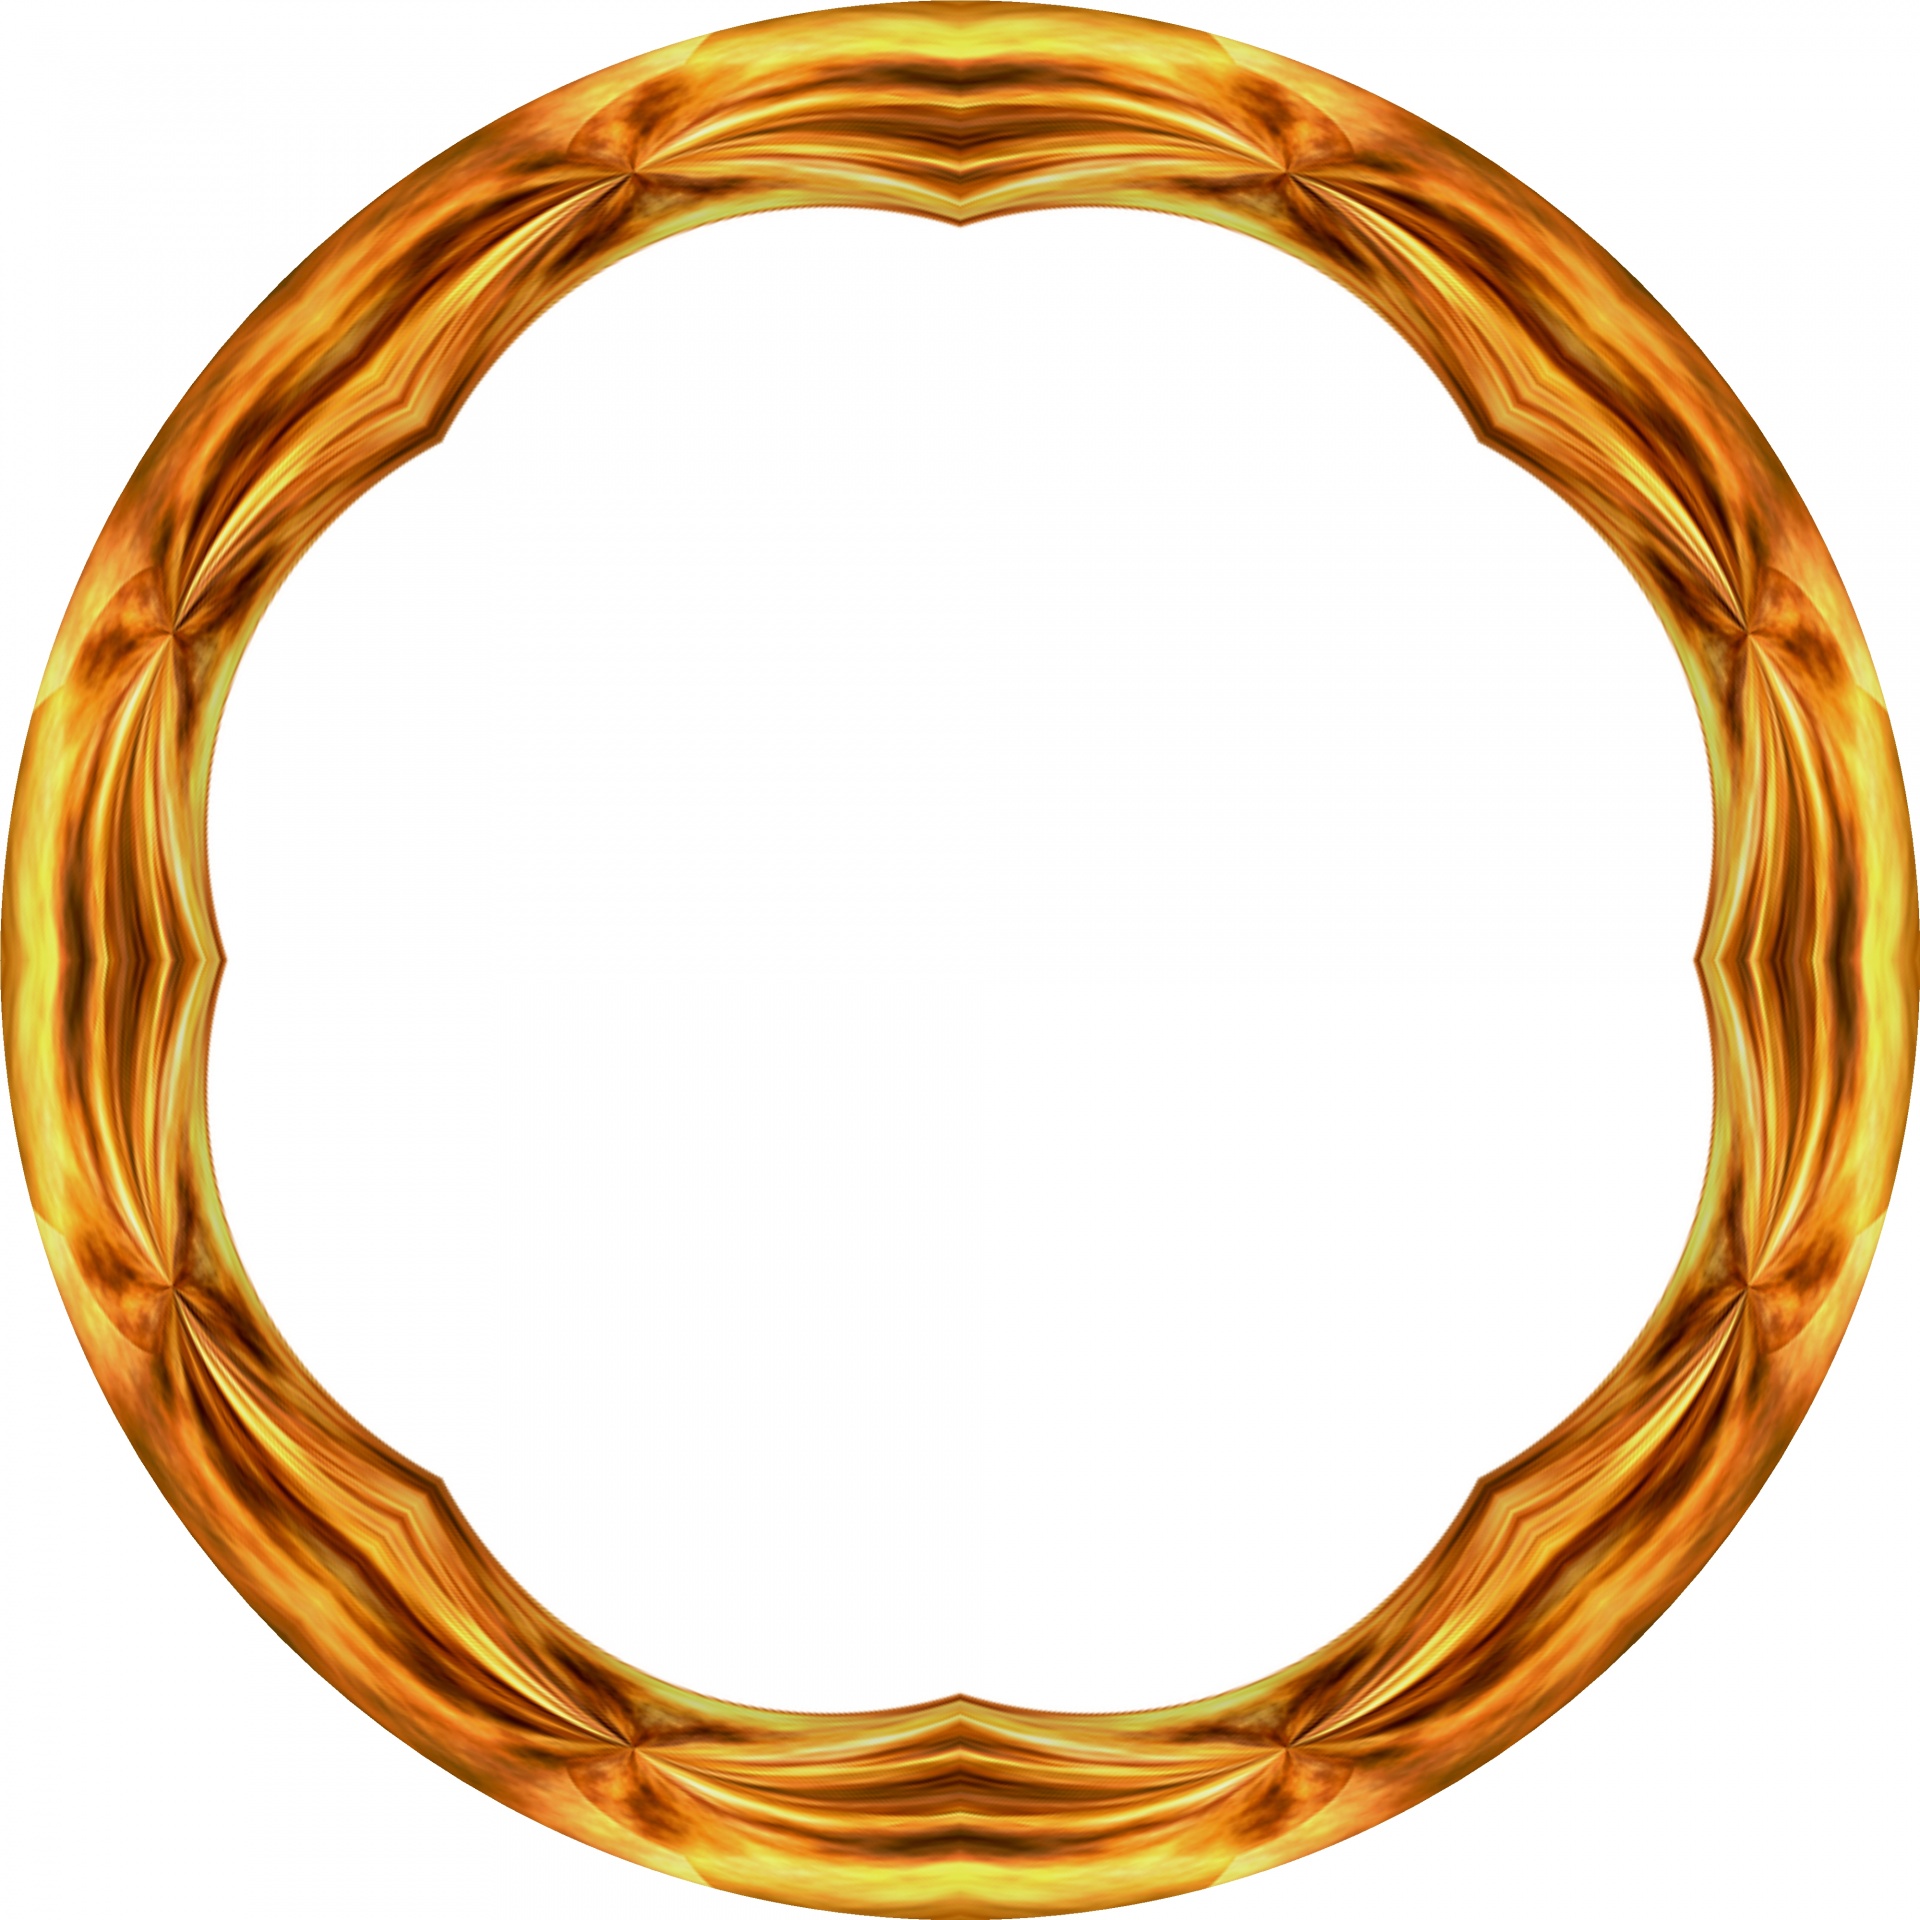 gold golden ring free photo